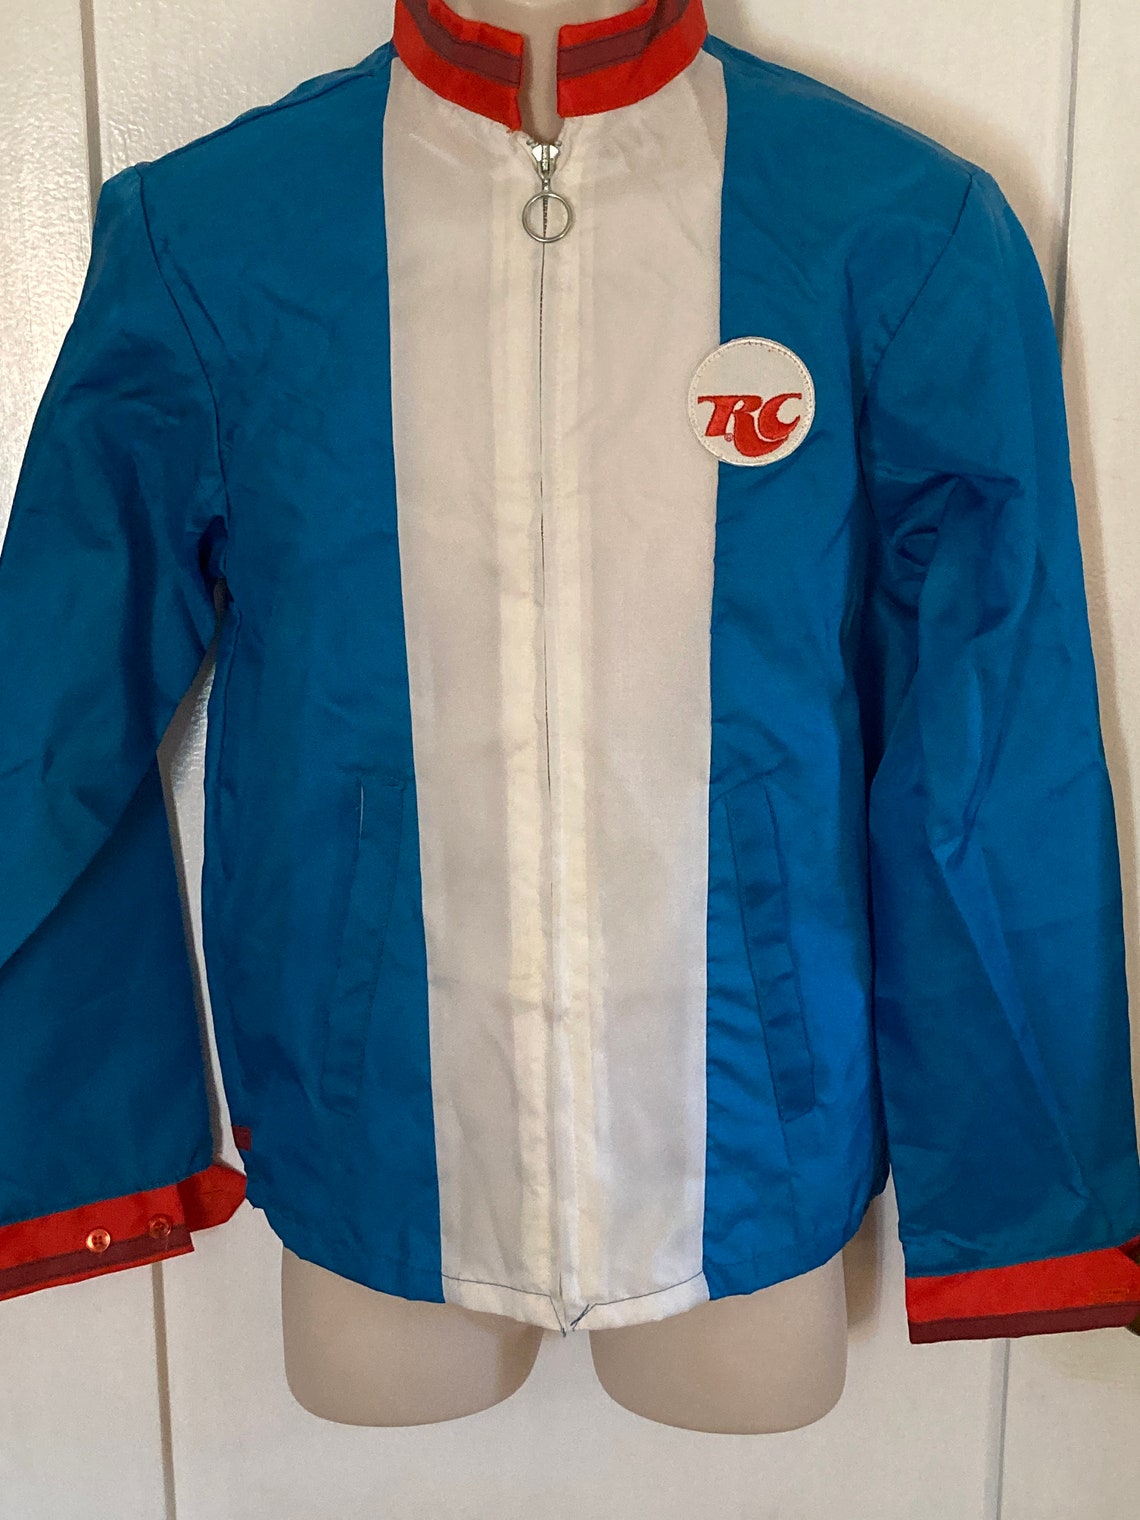 1960s RC COLA Company Red White And Blue Windbreaker | Etsy